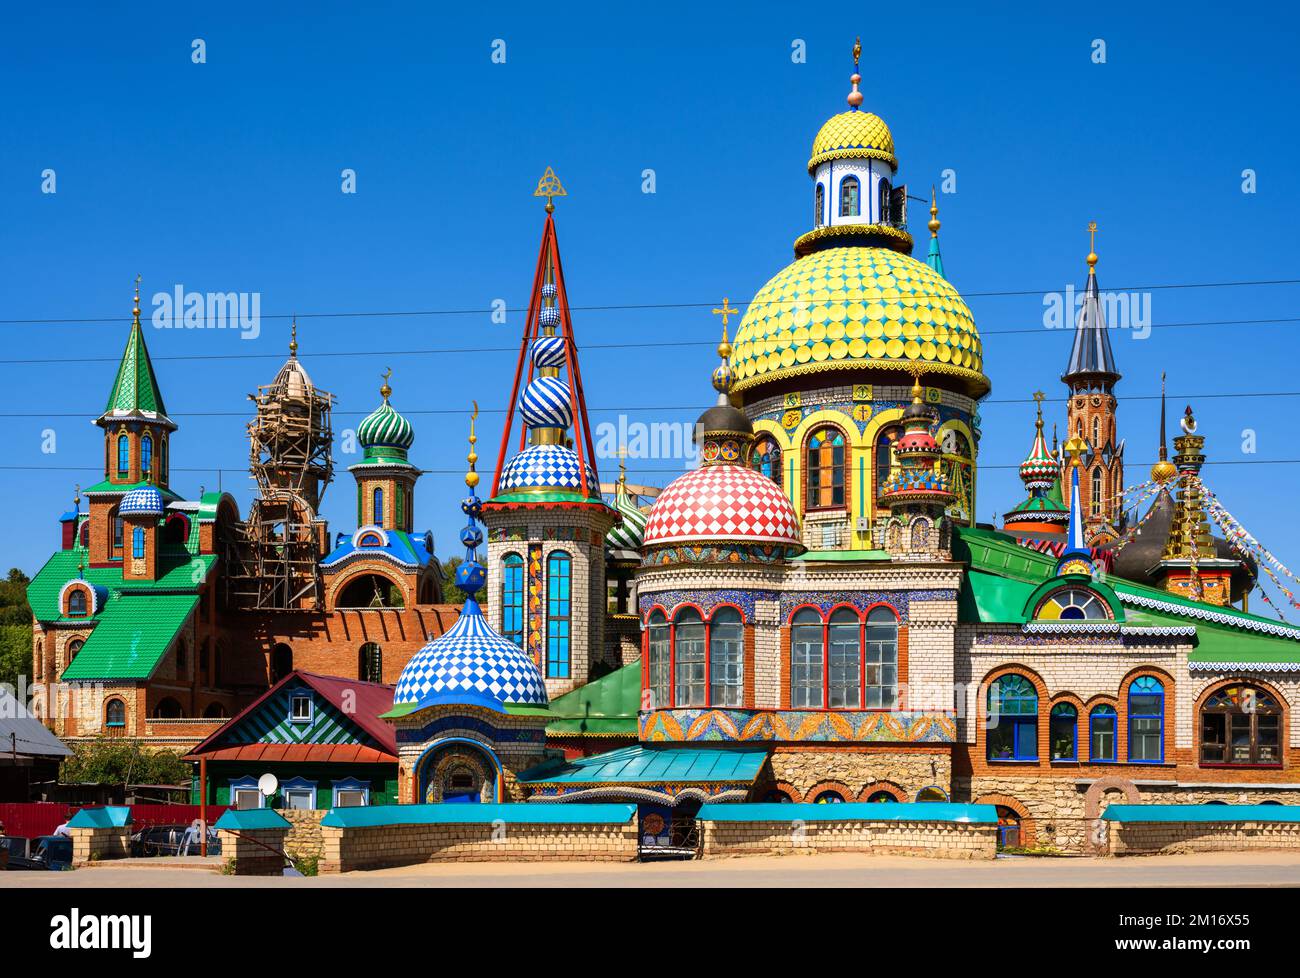 All Religions temple in Kazan, Tatarstan, Russia. It is landmark of Kazan. Panorama of beautiful colorful complex of churches, mosques and other place Stock Photo